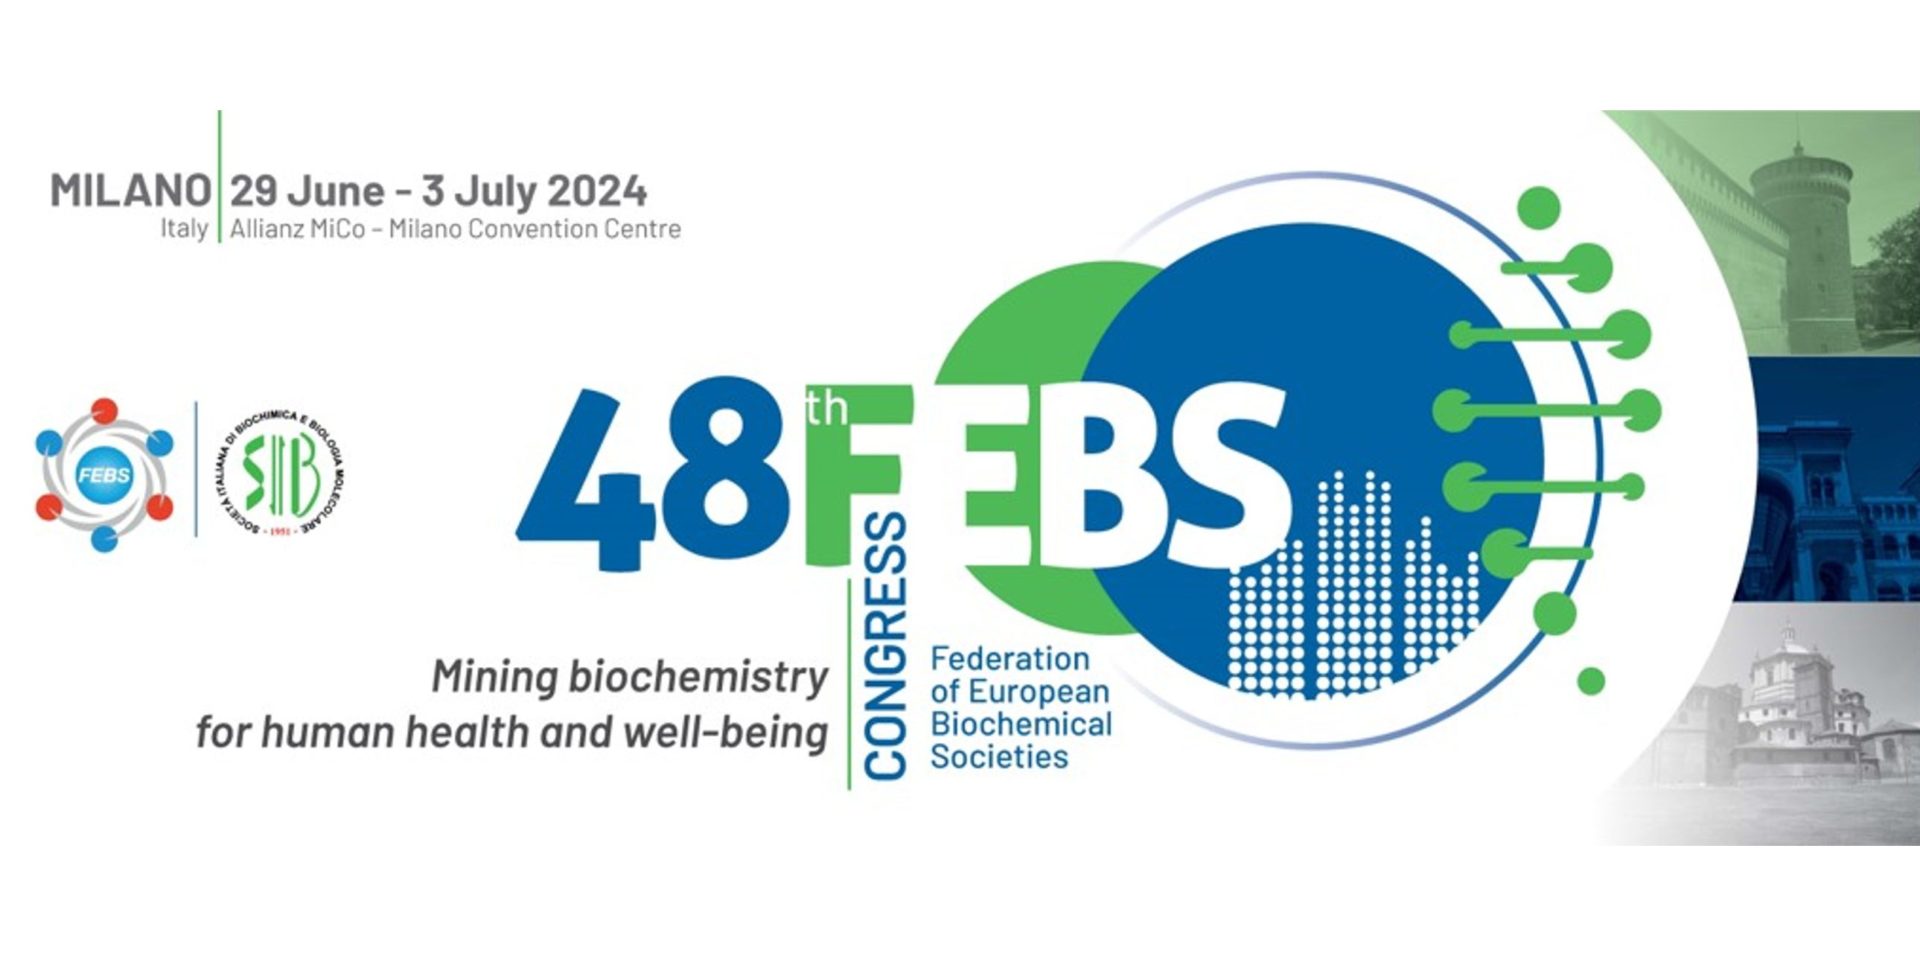 Plan your participation in the 48th FEBS Congress in Milano this summer